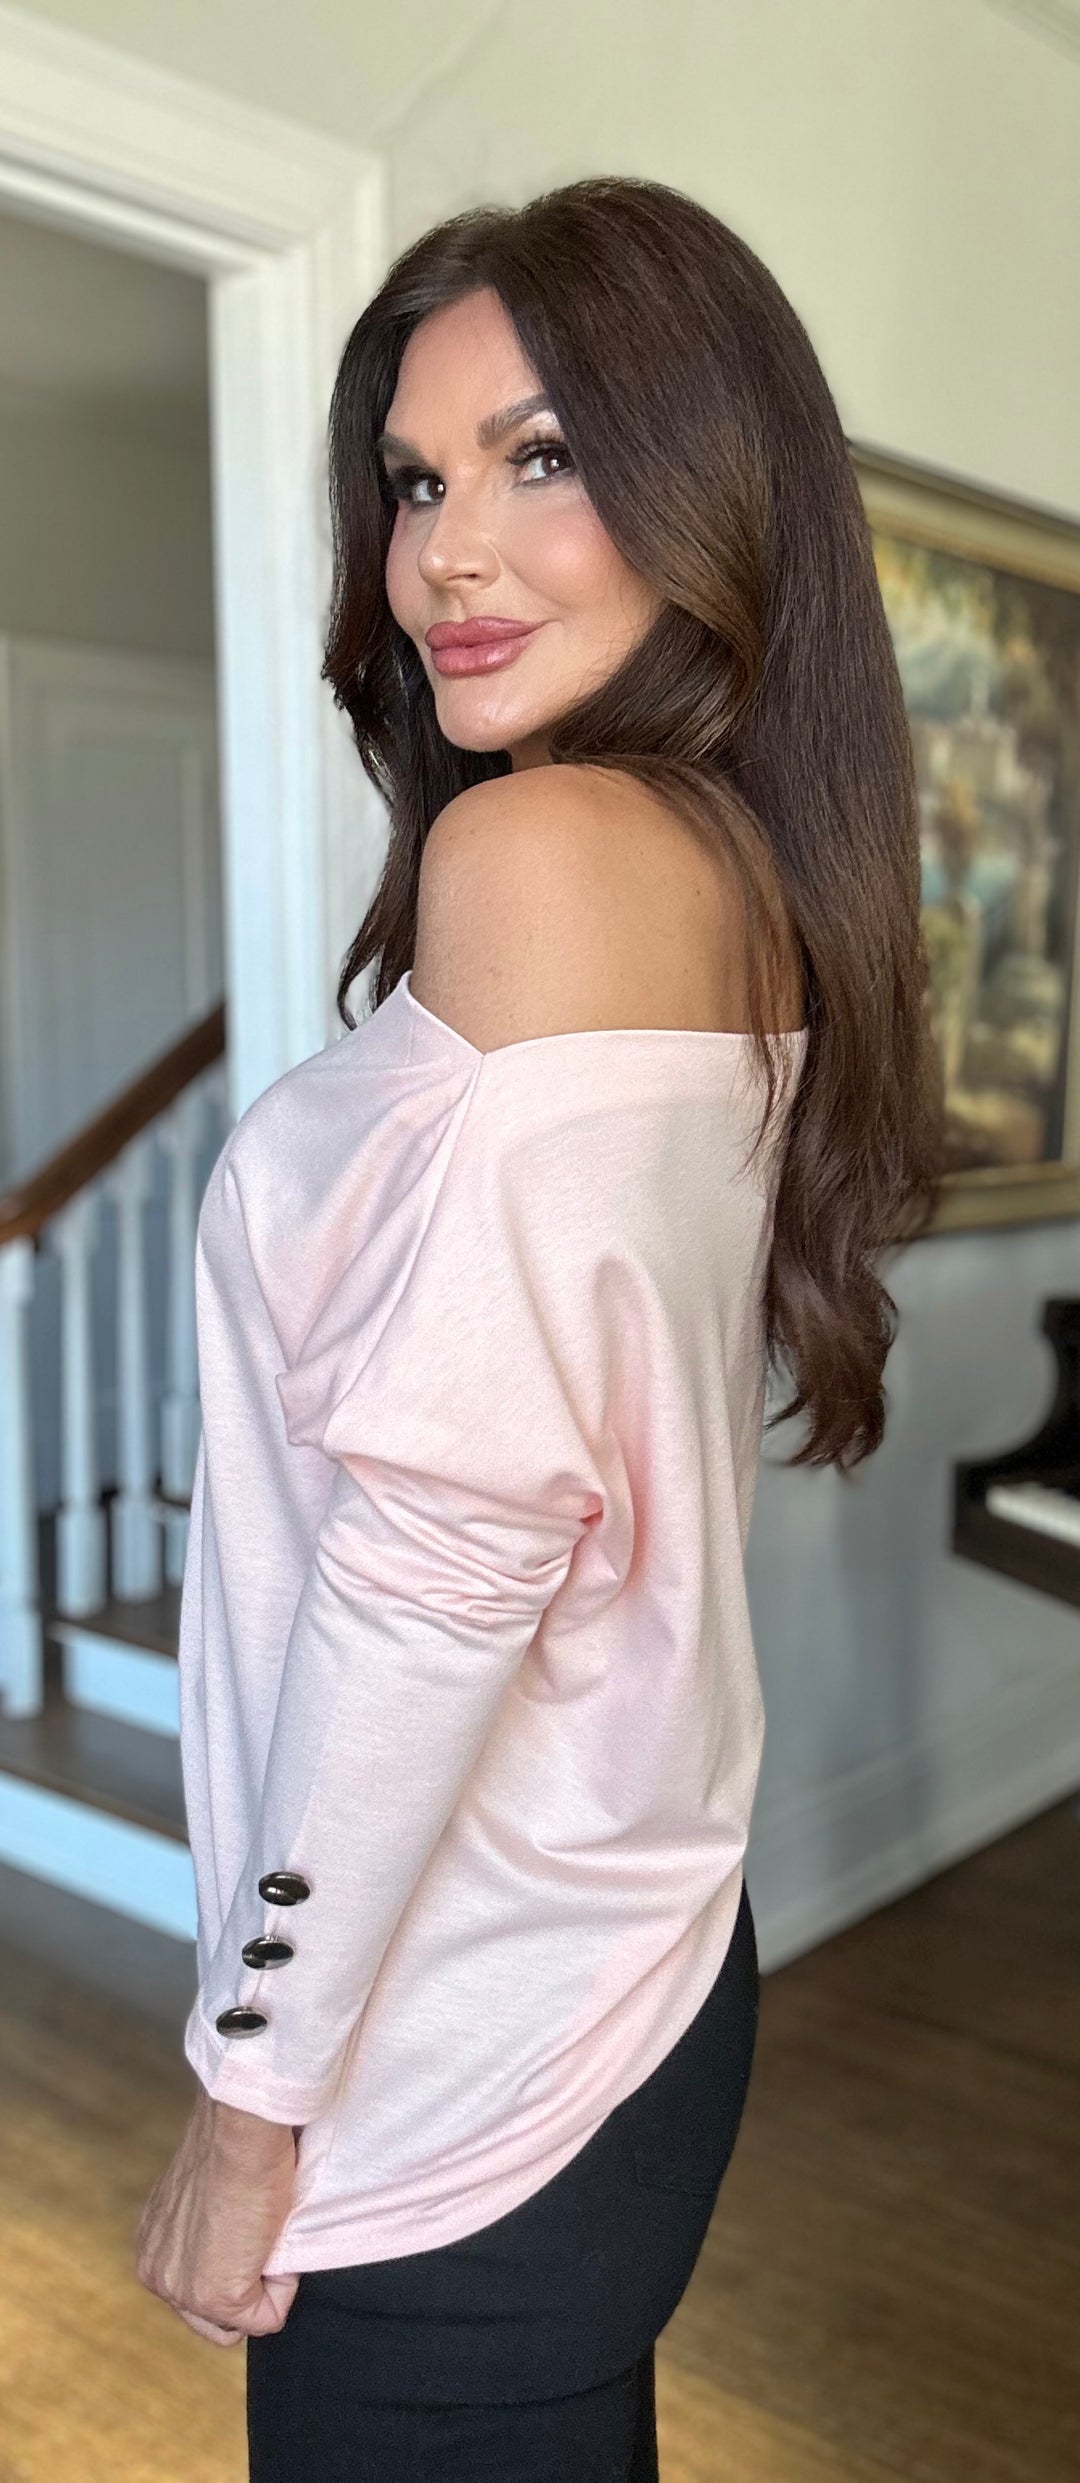 Kate pink nude batwing off the shoulder top